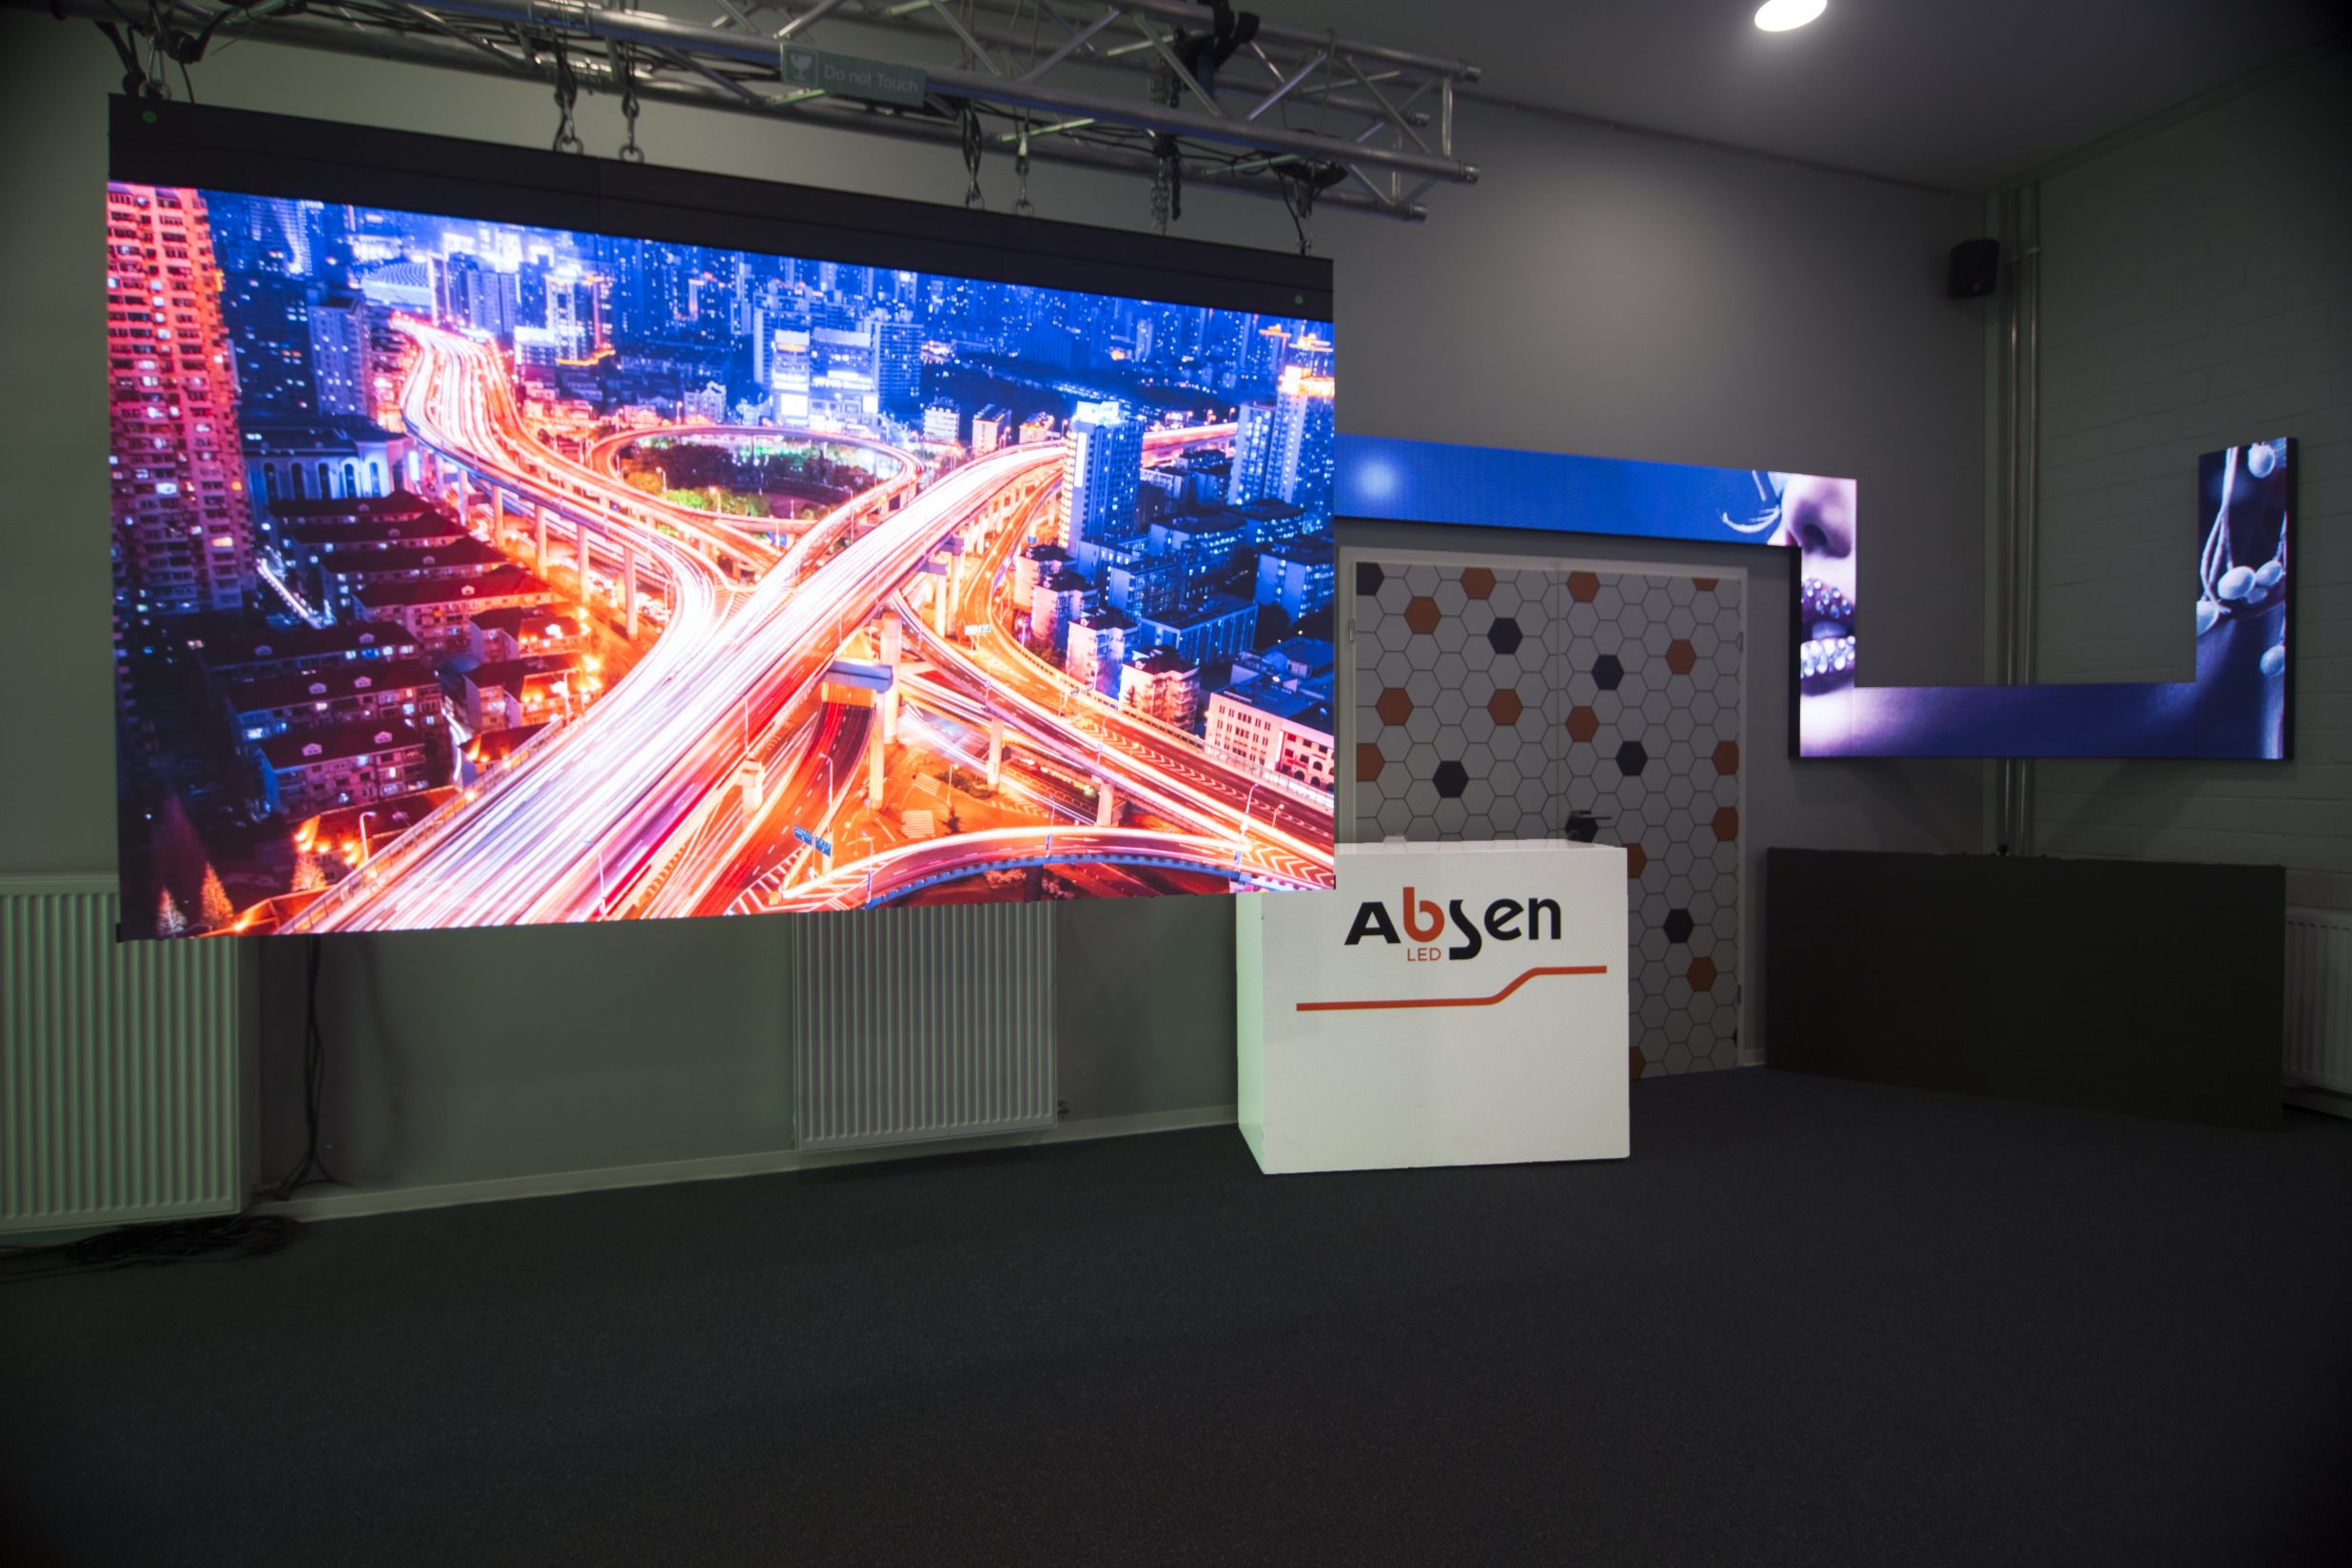 AV Stumpfl gives Wings to Absen Europe showroom expansion